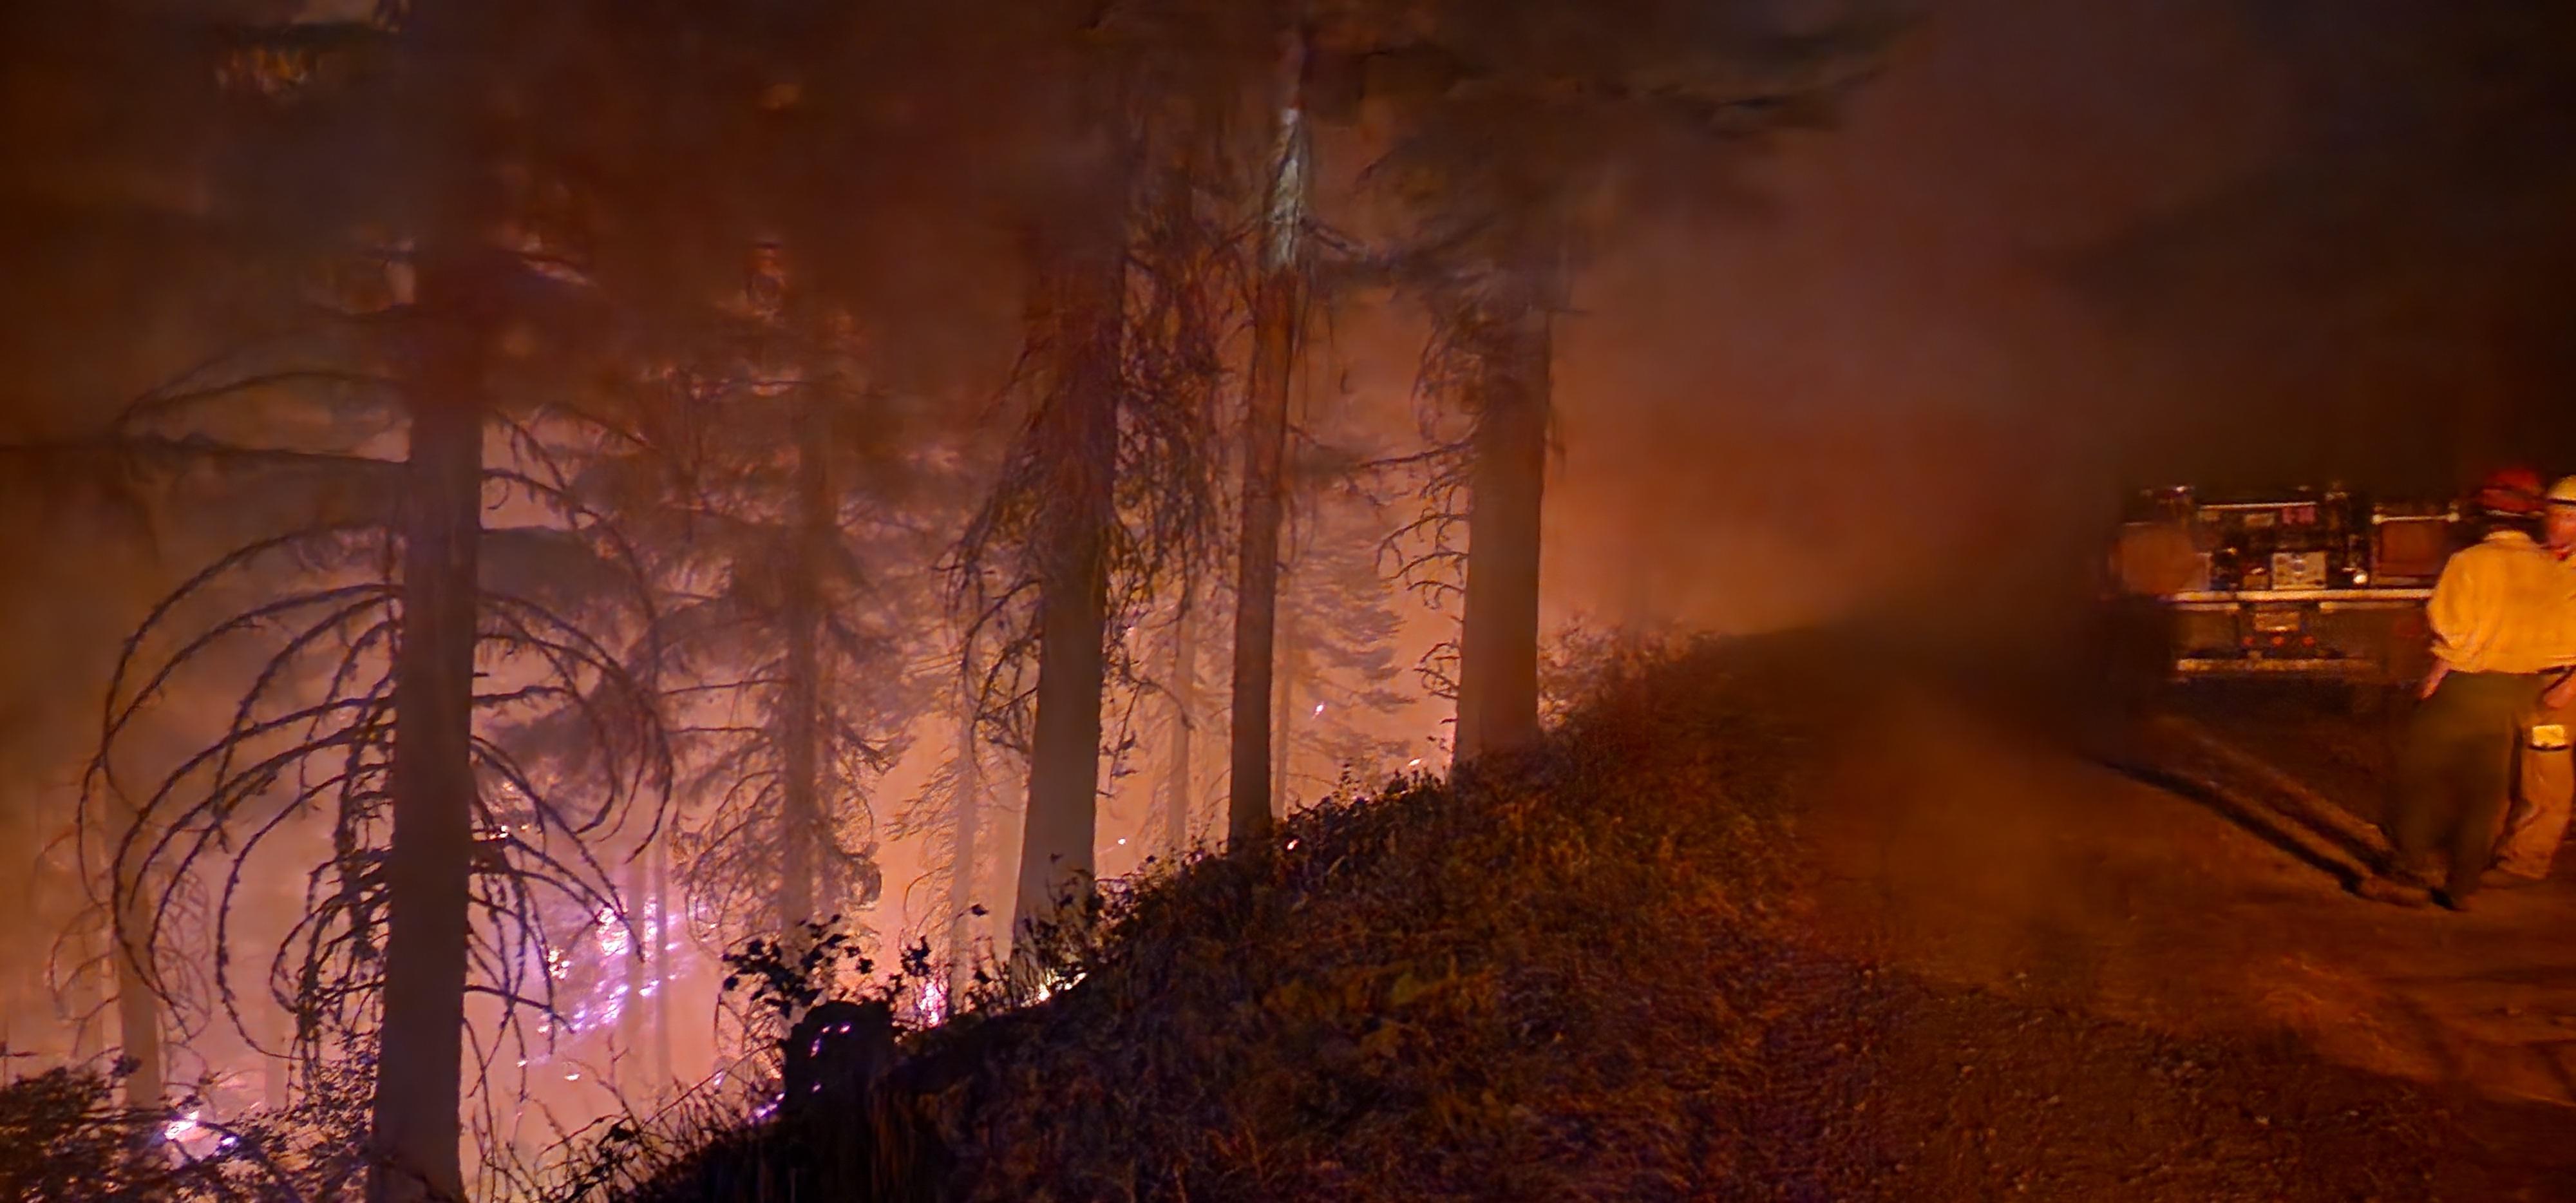 Unburned trees stand on a steep slope with fire burning on and near the ground around them. Firefighters stand by a fire truck on a road above the slope, monitoring the fire.